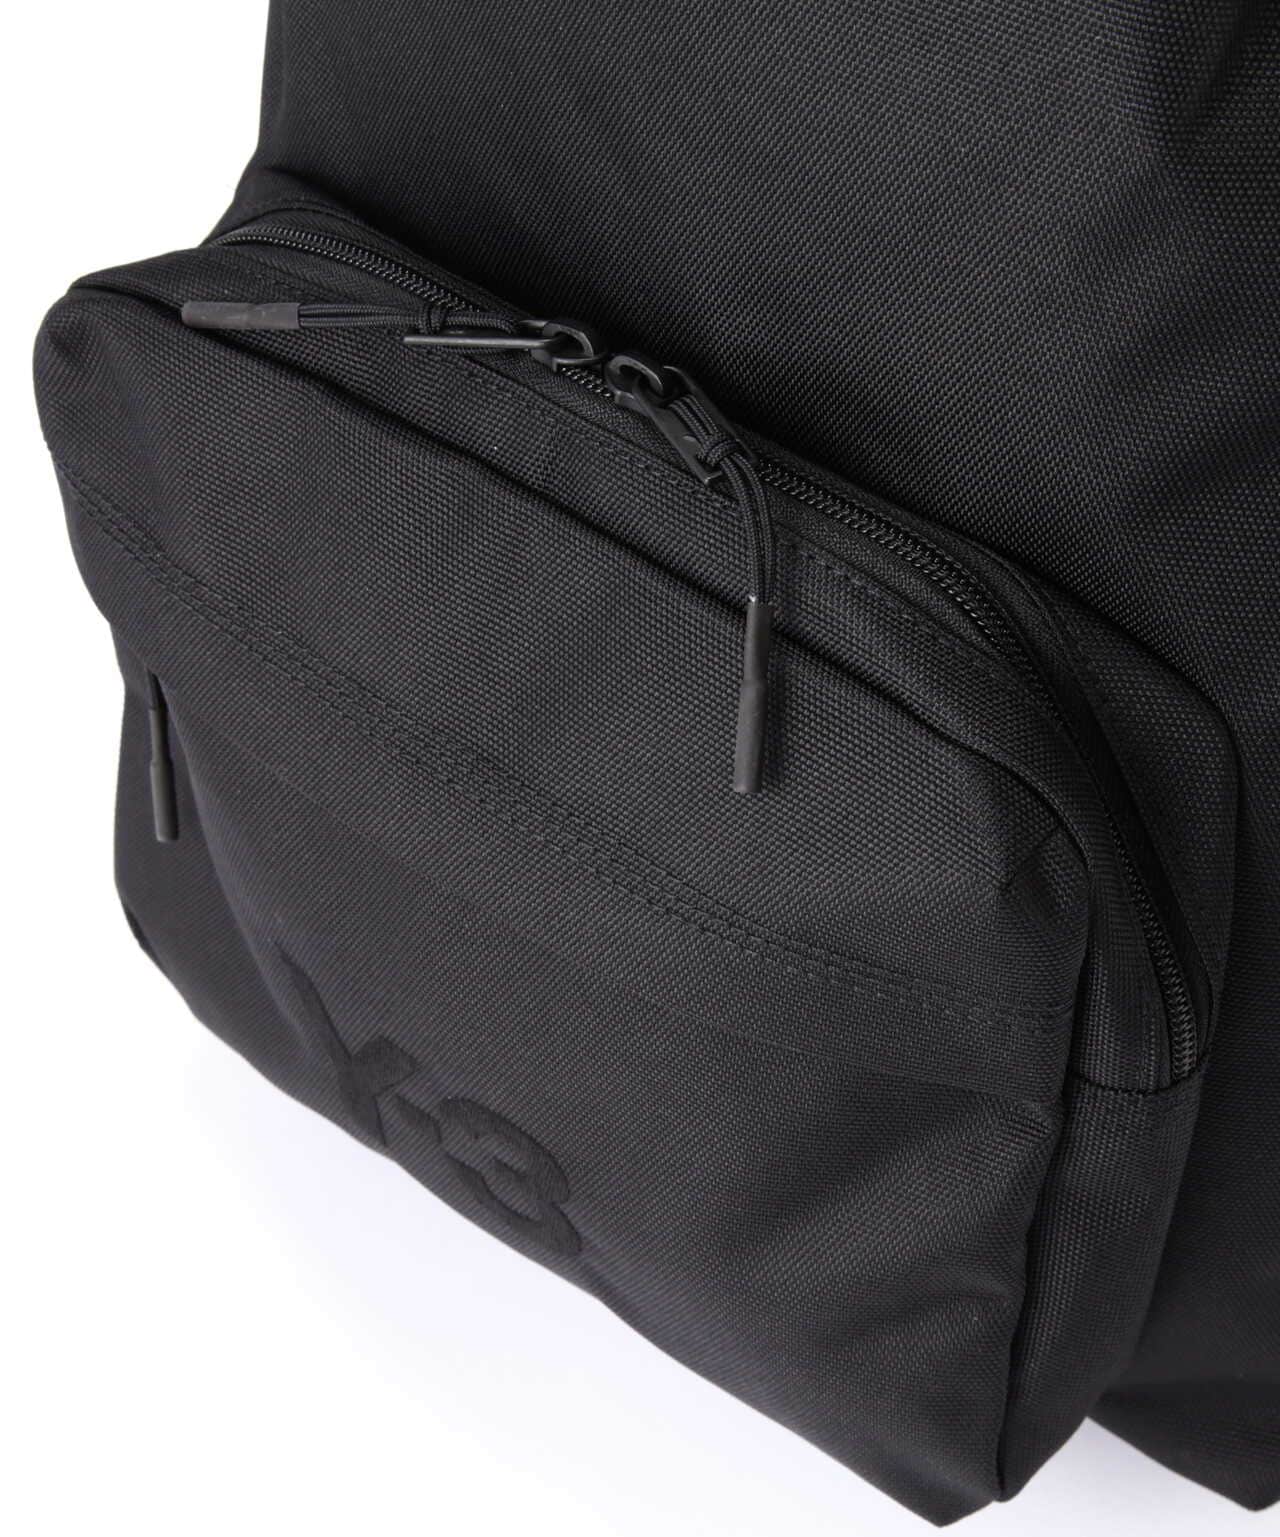 Y-3/ワイスリー/CLASSIC BACK PACK/クラシックバックパック | LHP 